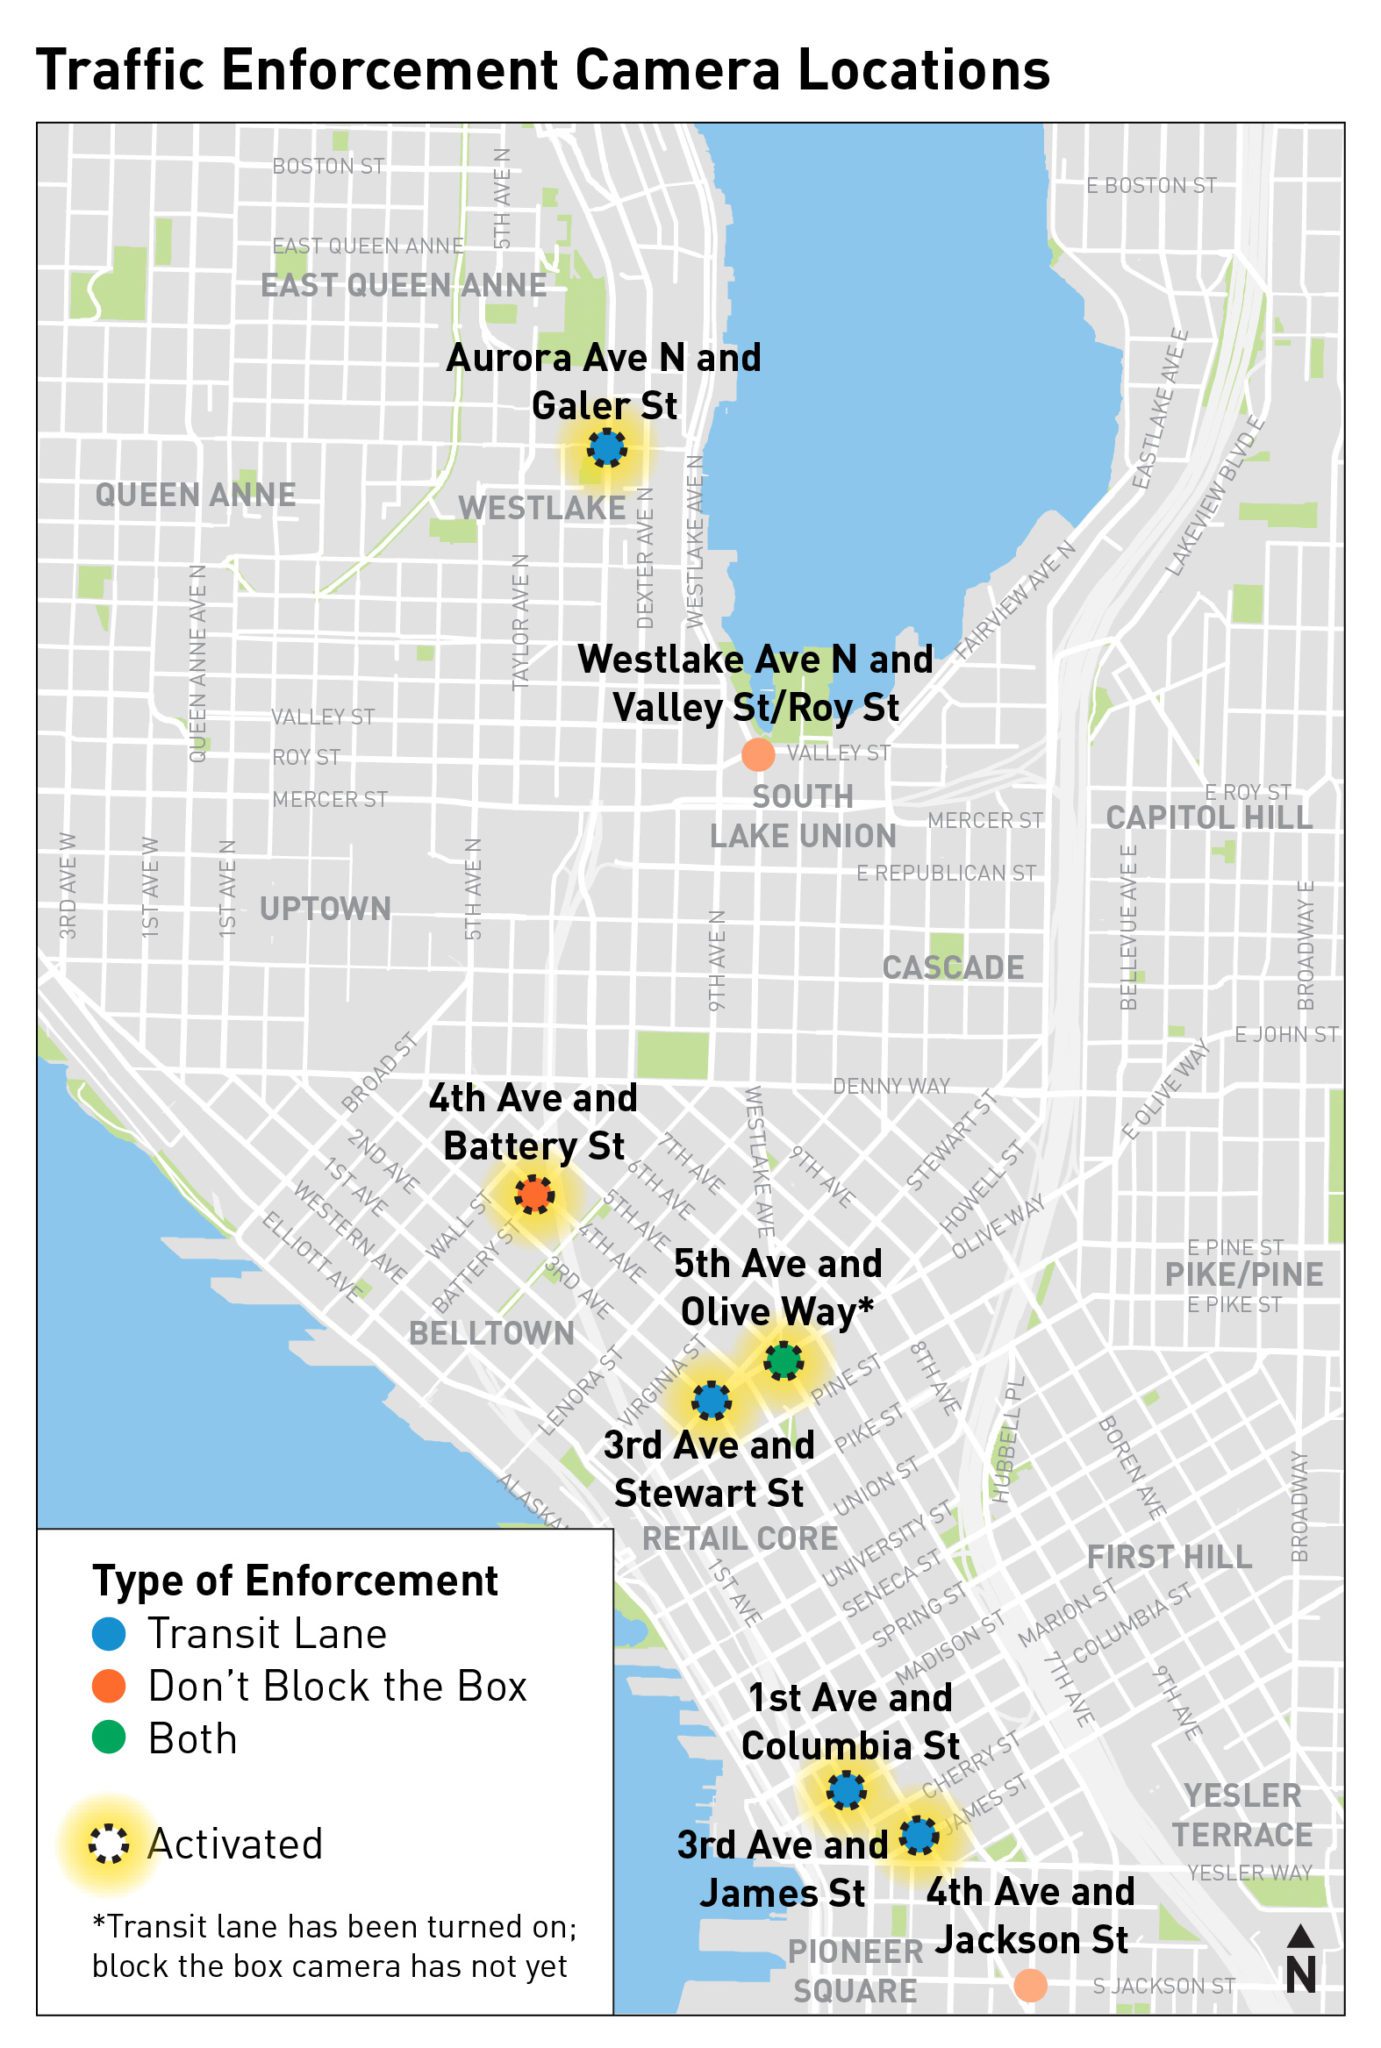 Map of locations in and around downtown Seattle where traffic cameras have been installed and are being gradually activated to help reduce blocking of key intersections, crosswalks, and transit lanes. Cameras that have been activated are shown with a light yellow highlighted outline.